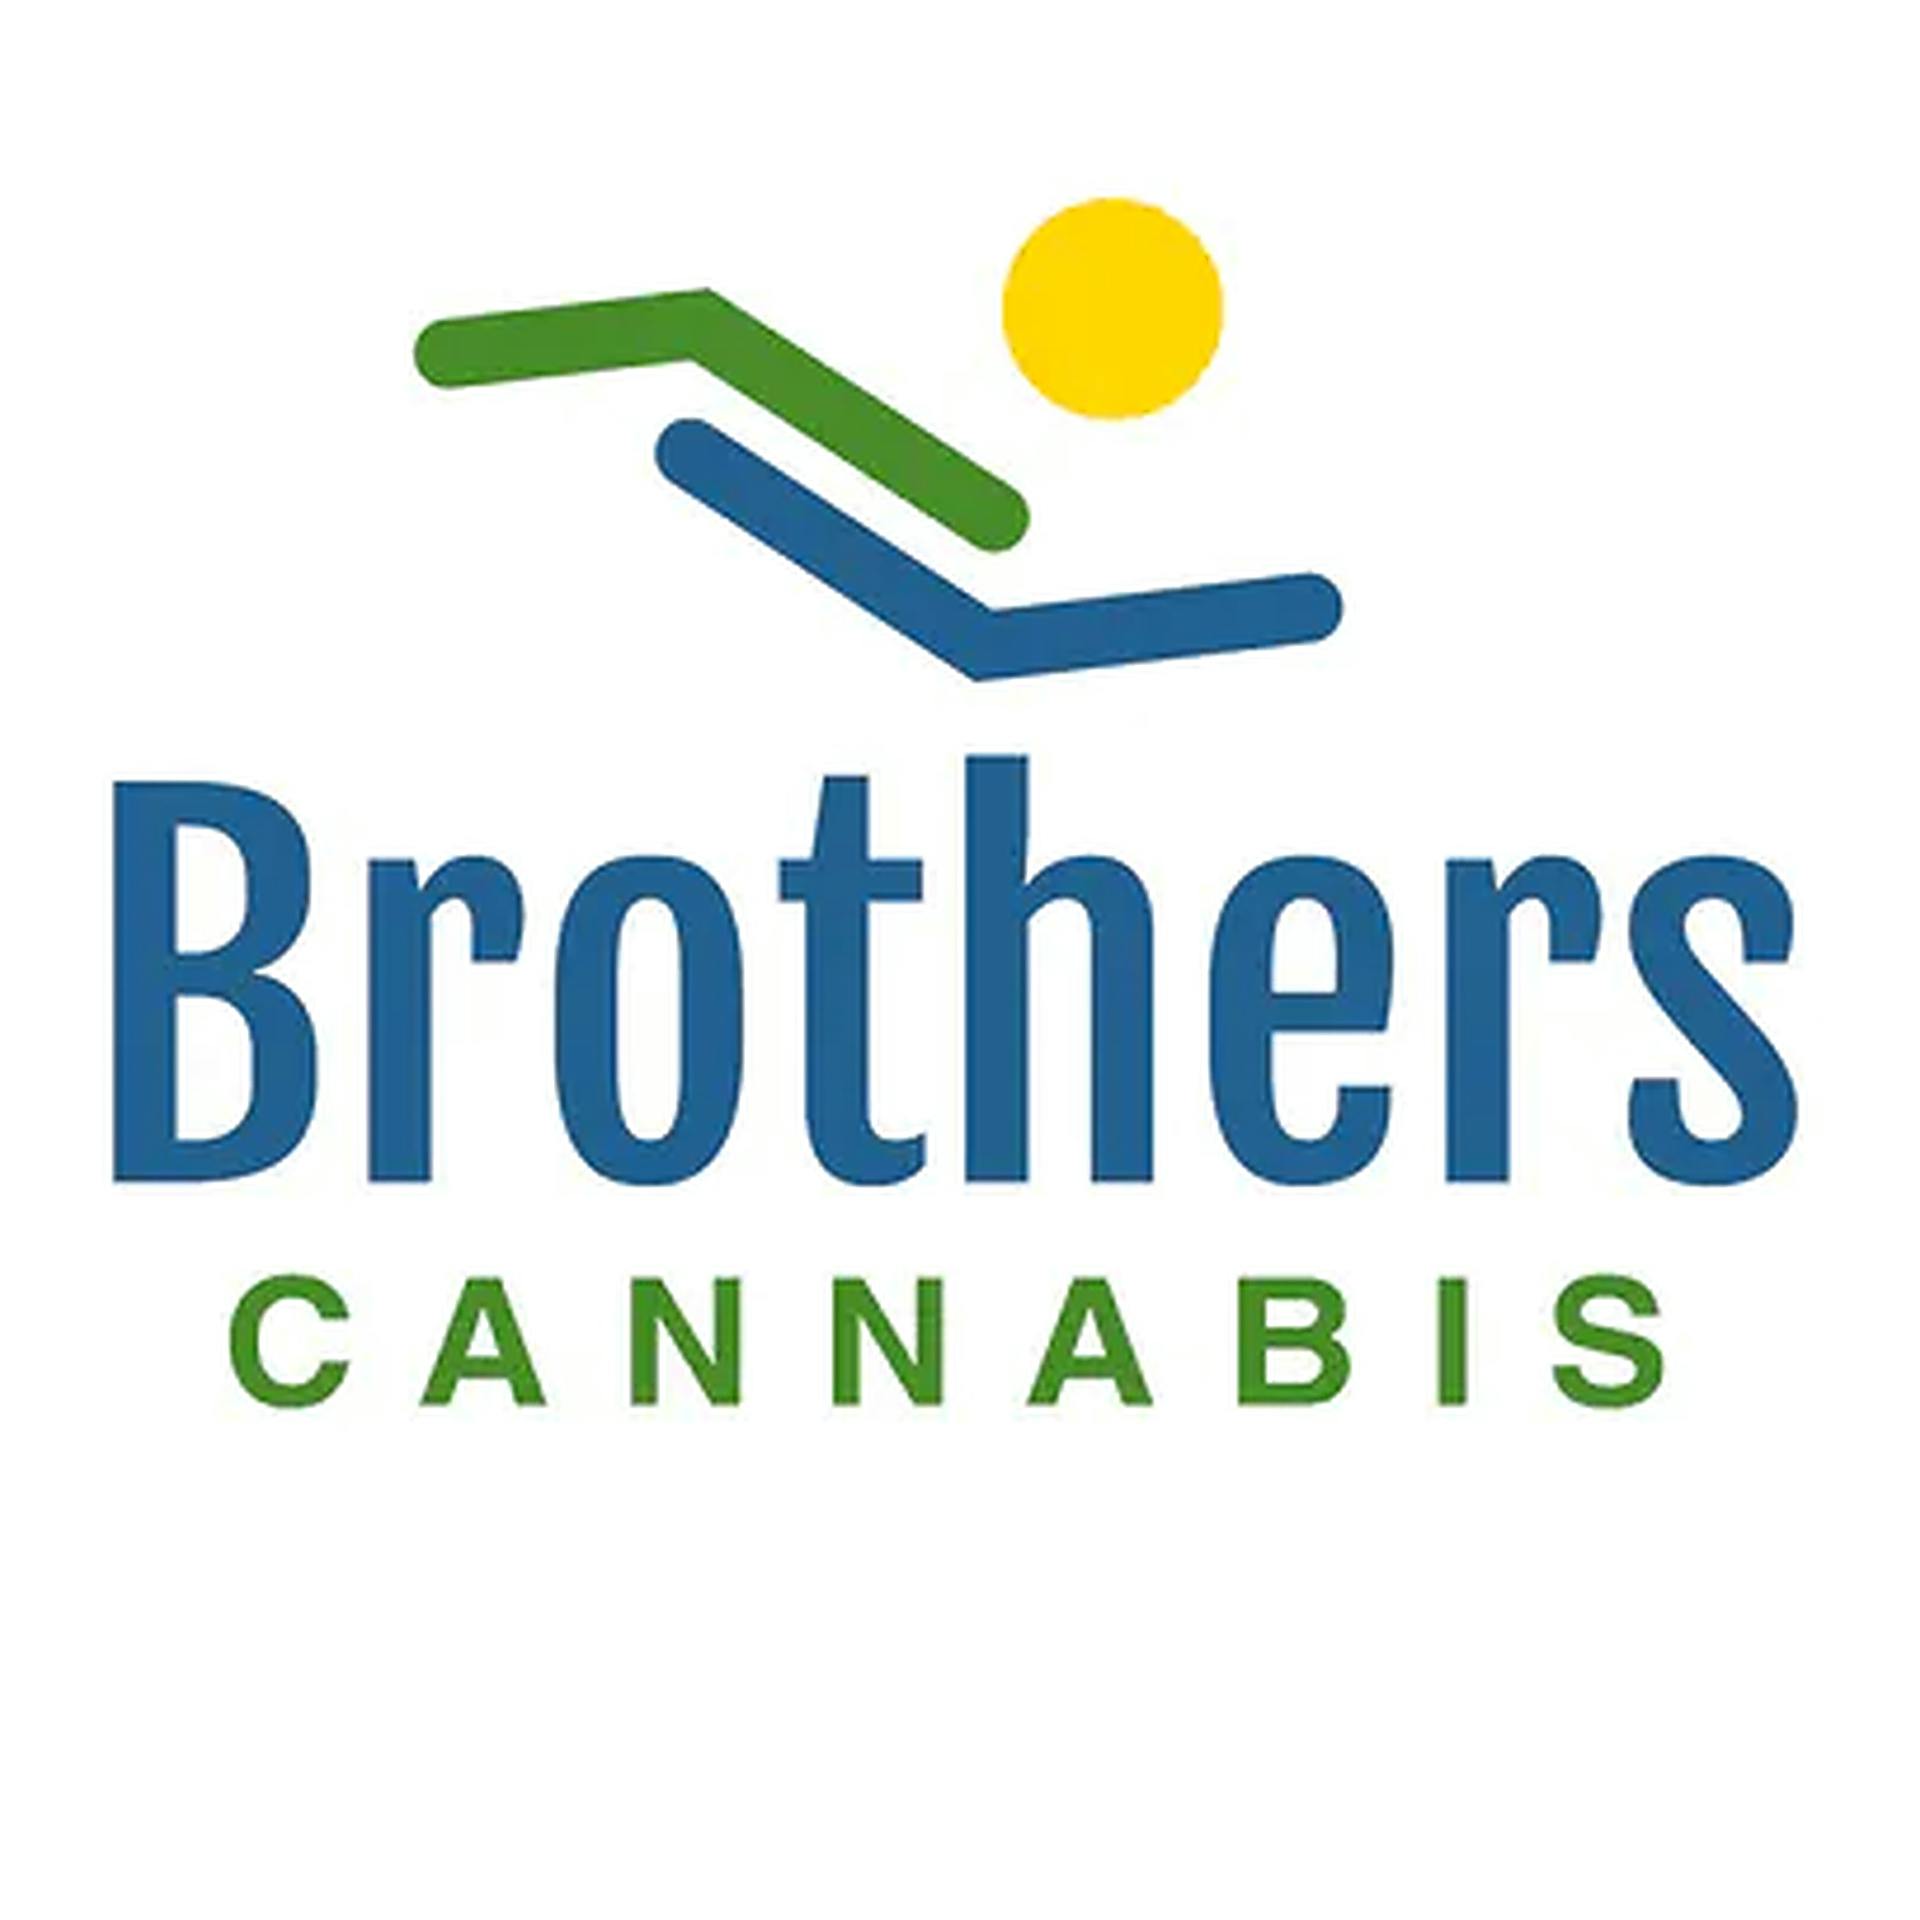 Brothers Cannabis